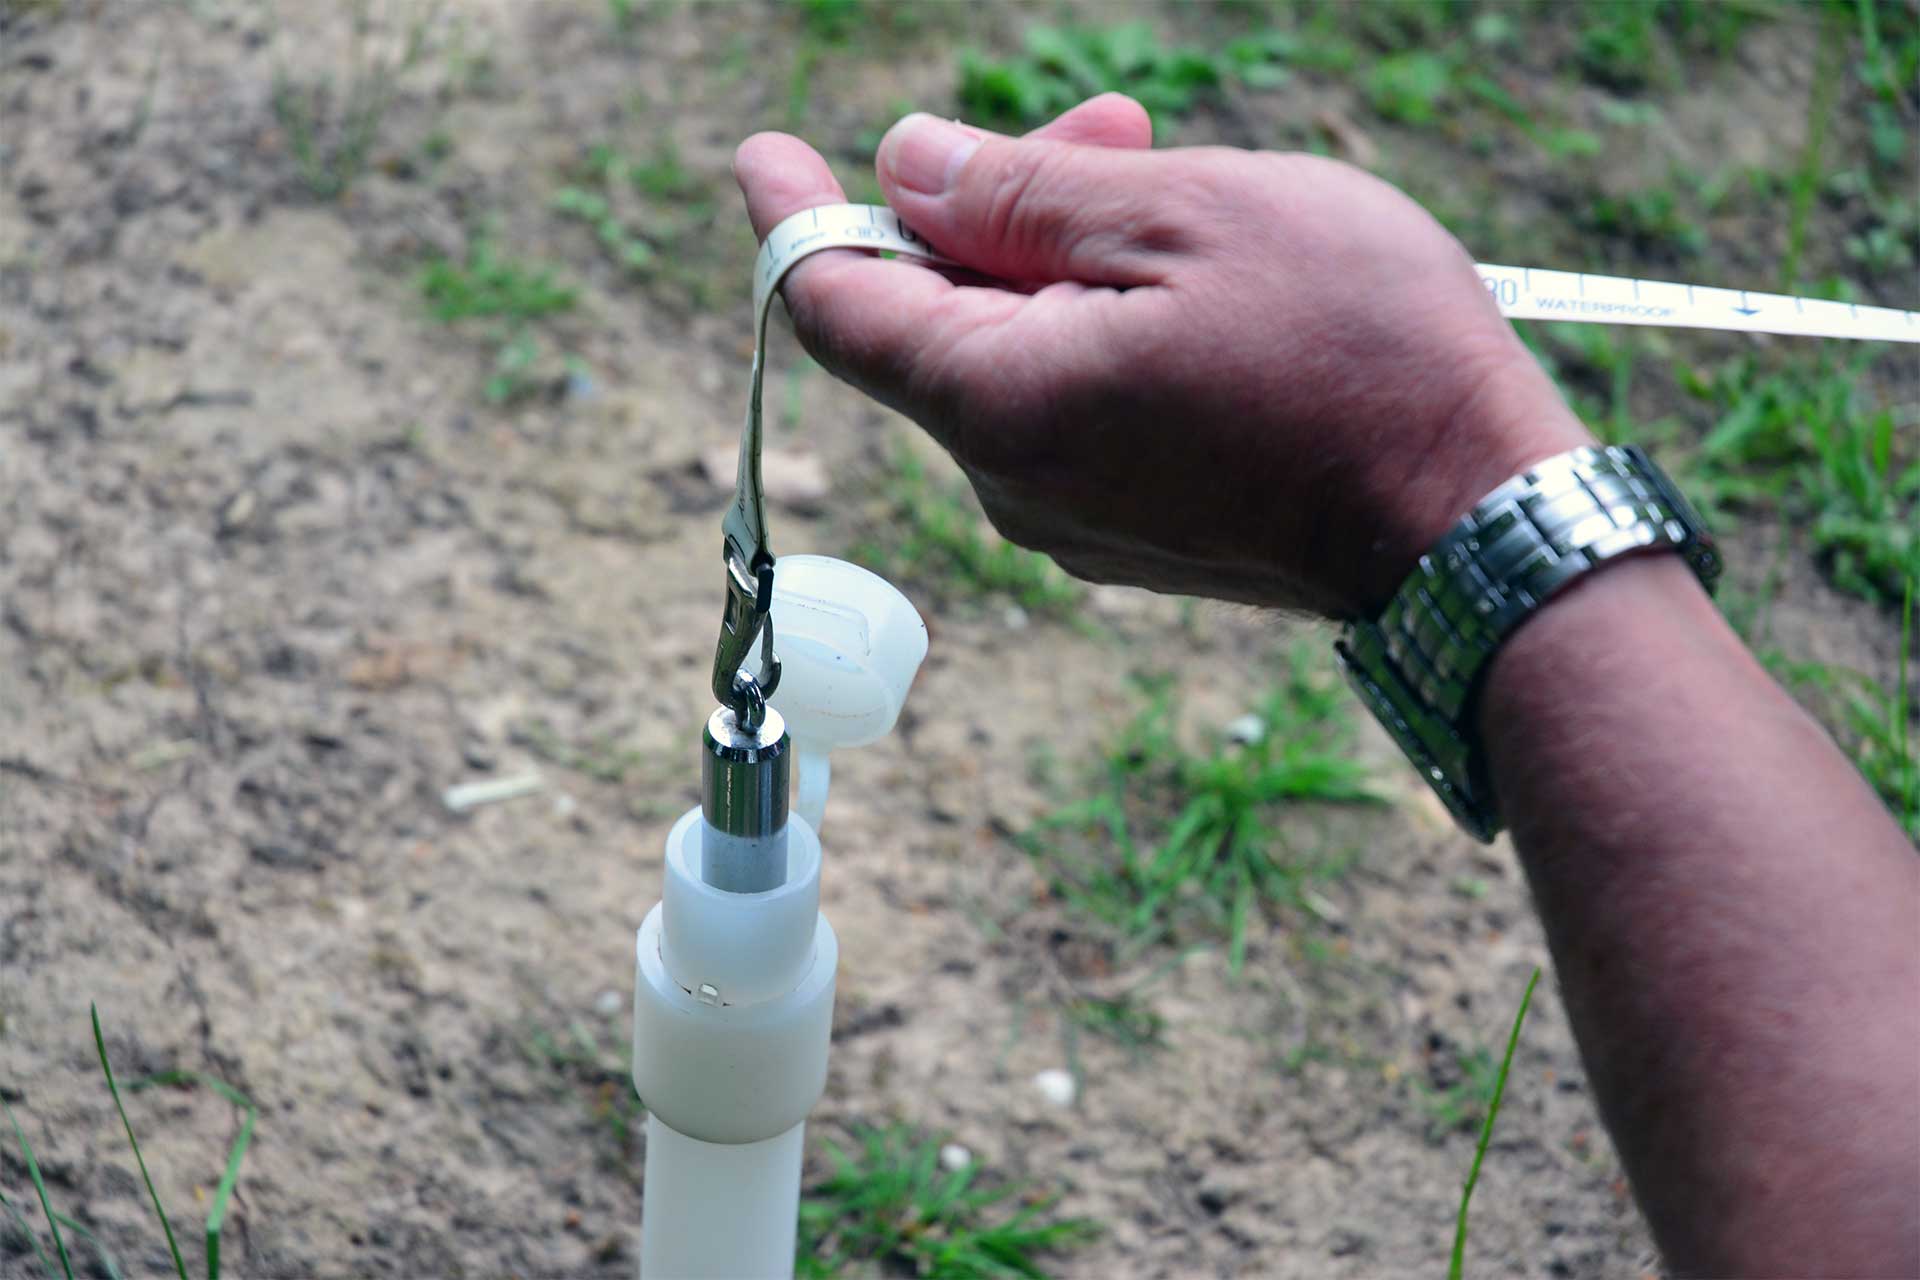 Using the water level meter